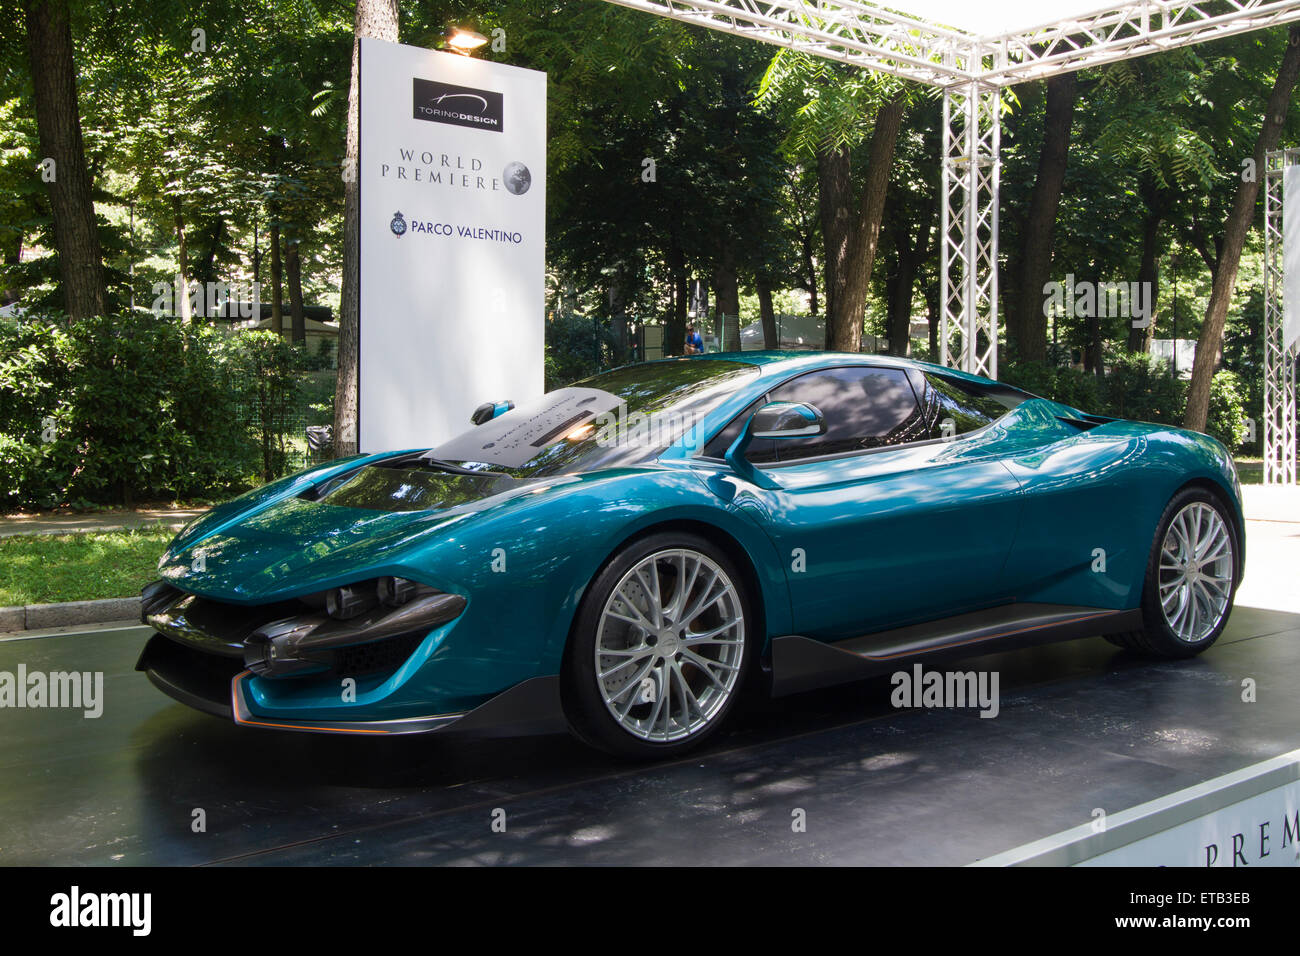 Turin, Italy, 11th June 2015. A prototype car by Torino Design. Parco Valentino car show hosted 93 cars by many automobile manufacturers and car designers inside Valentino Park, Torino, Italy. Stock Photo